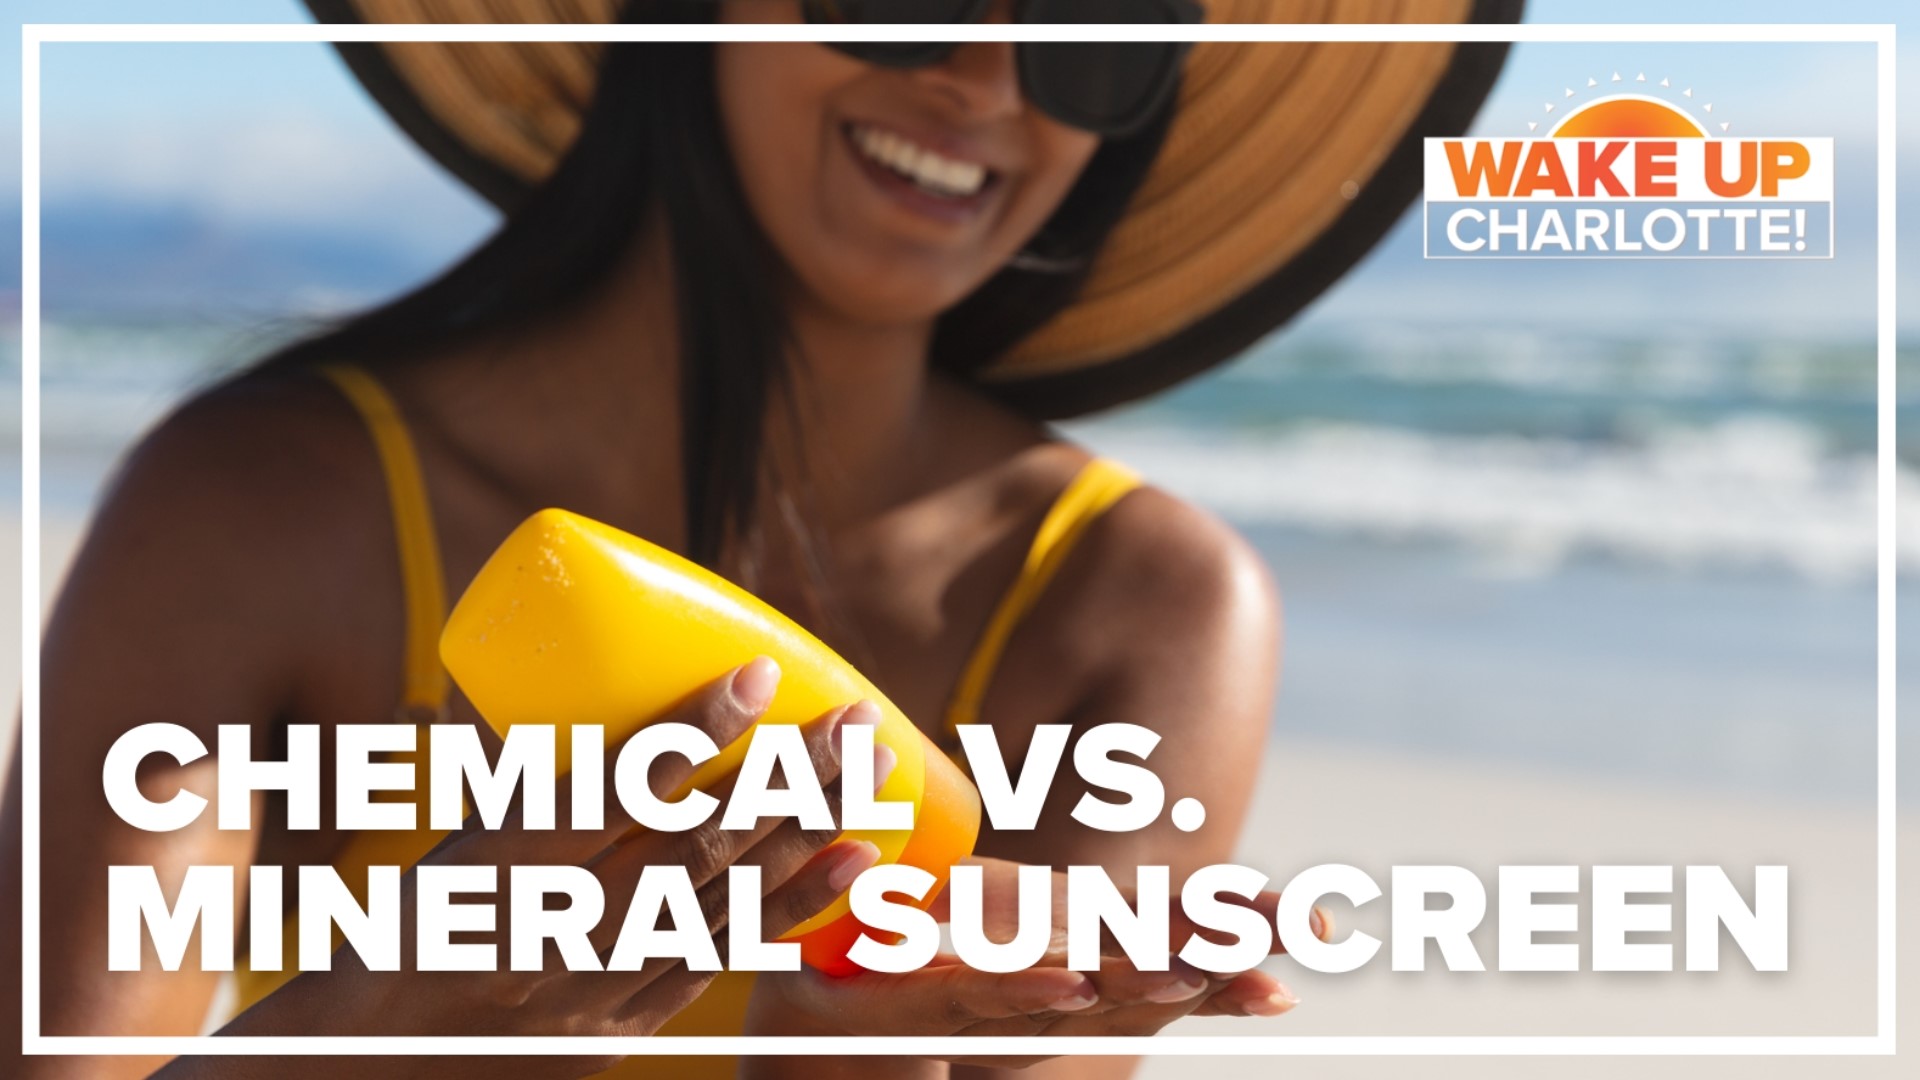 With many different types of sunscreen on store shelves, is one better than the other?